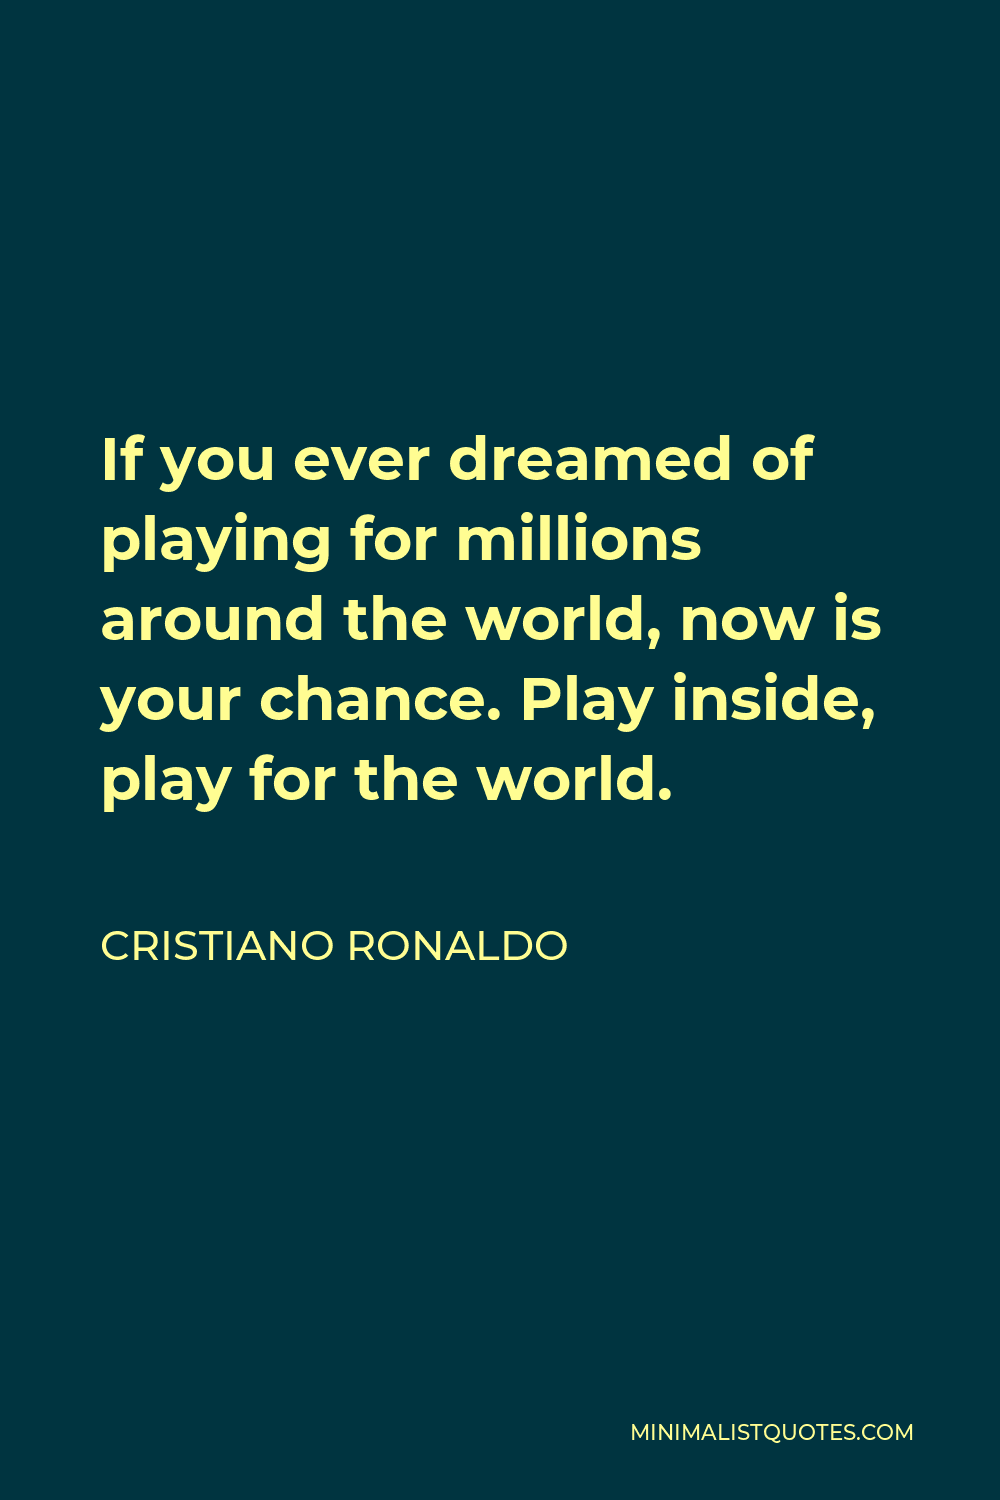 Cristiano Ronaldo Quote - If you ever dreamed of playing for millions around the world, now is your chance. Play inside, play for the world.